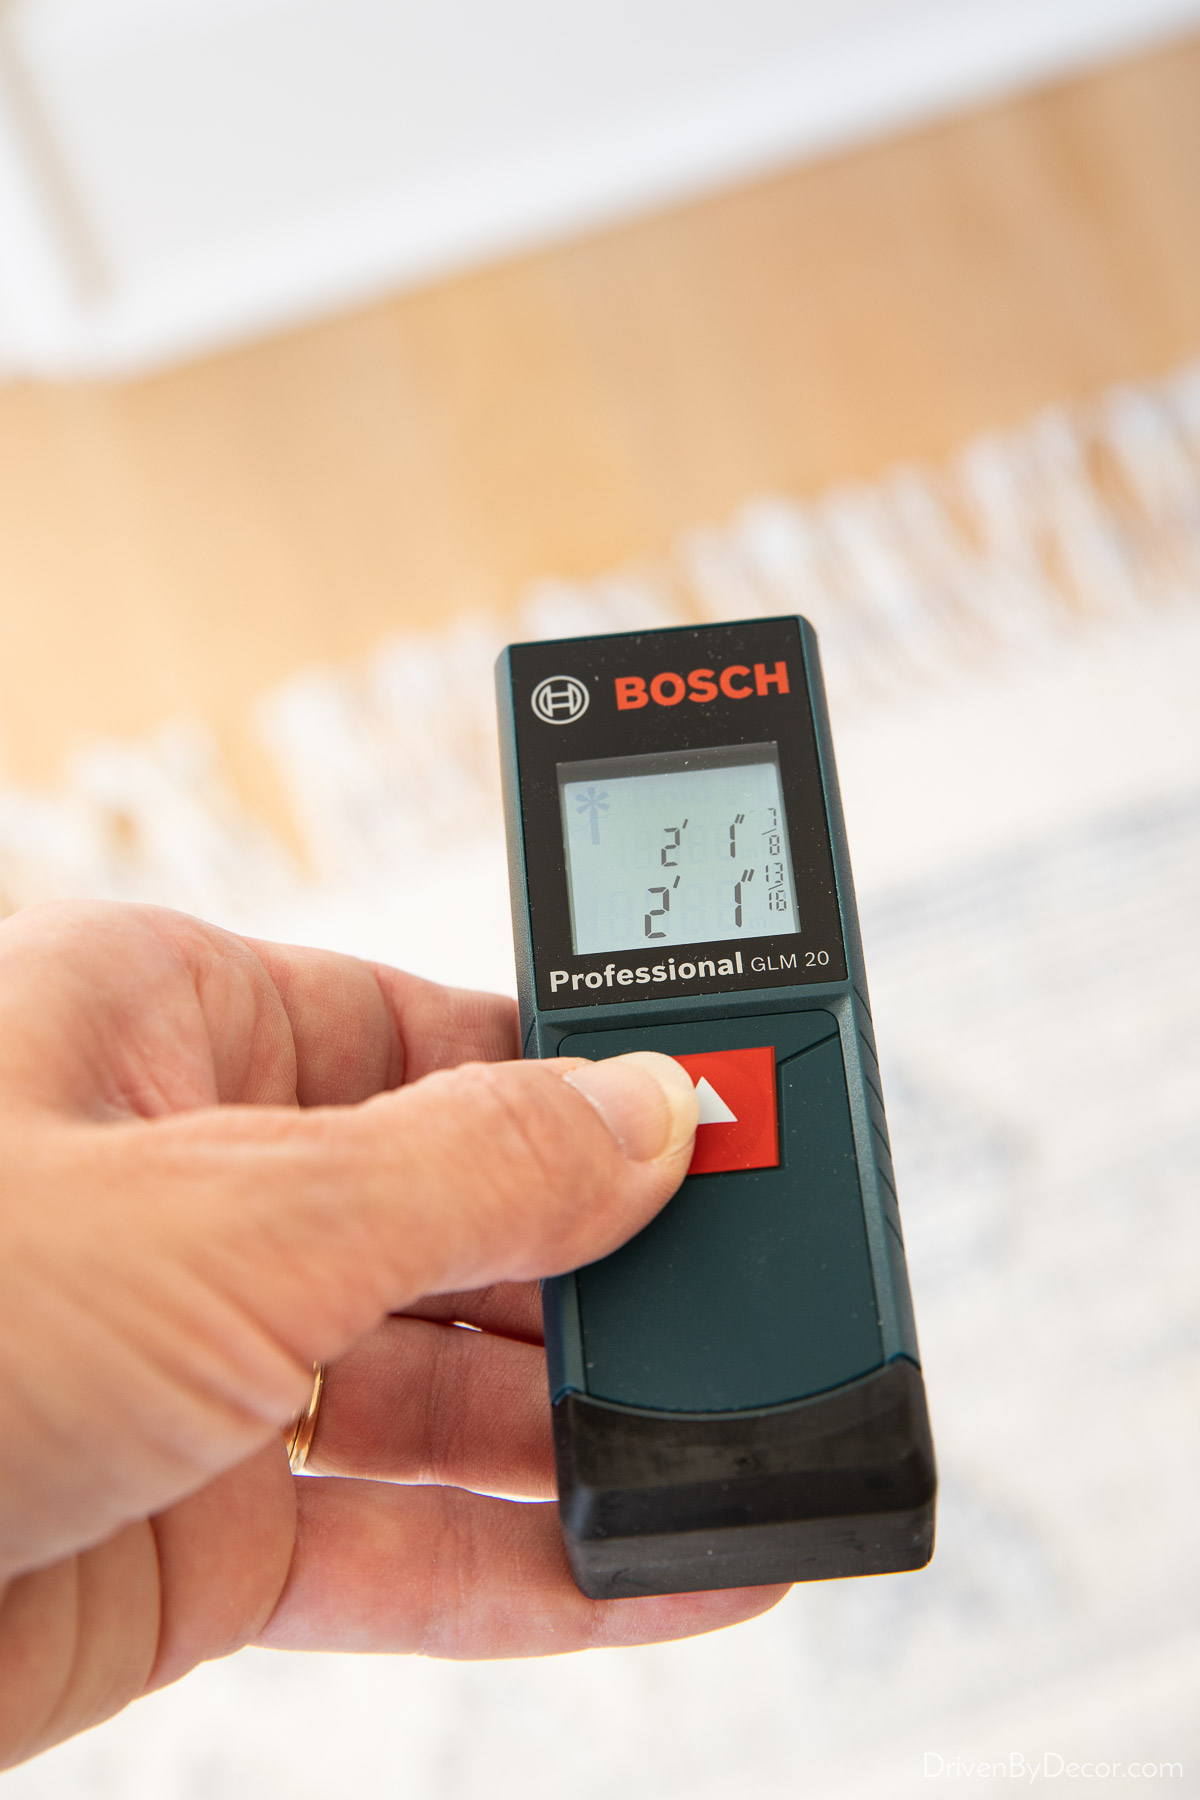 Laser measuring device - a great stocking stuffer to add to your Christmas wish list!